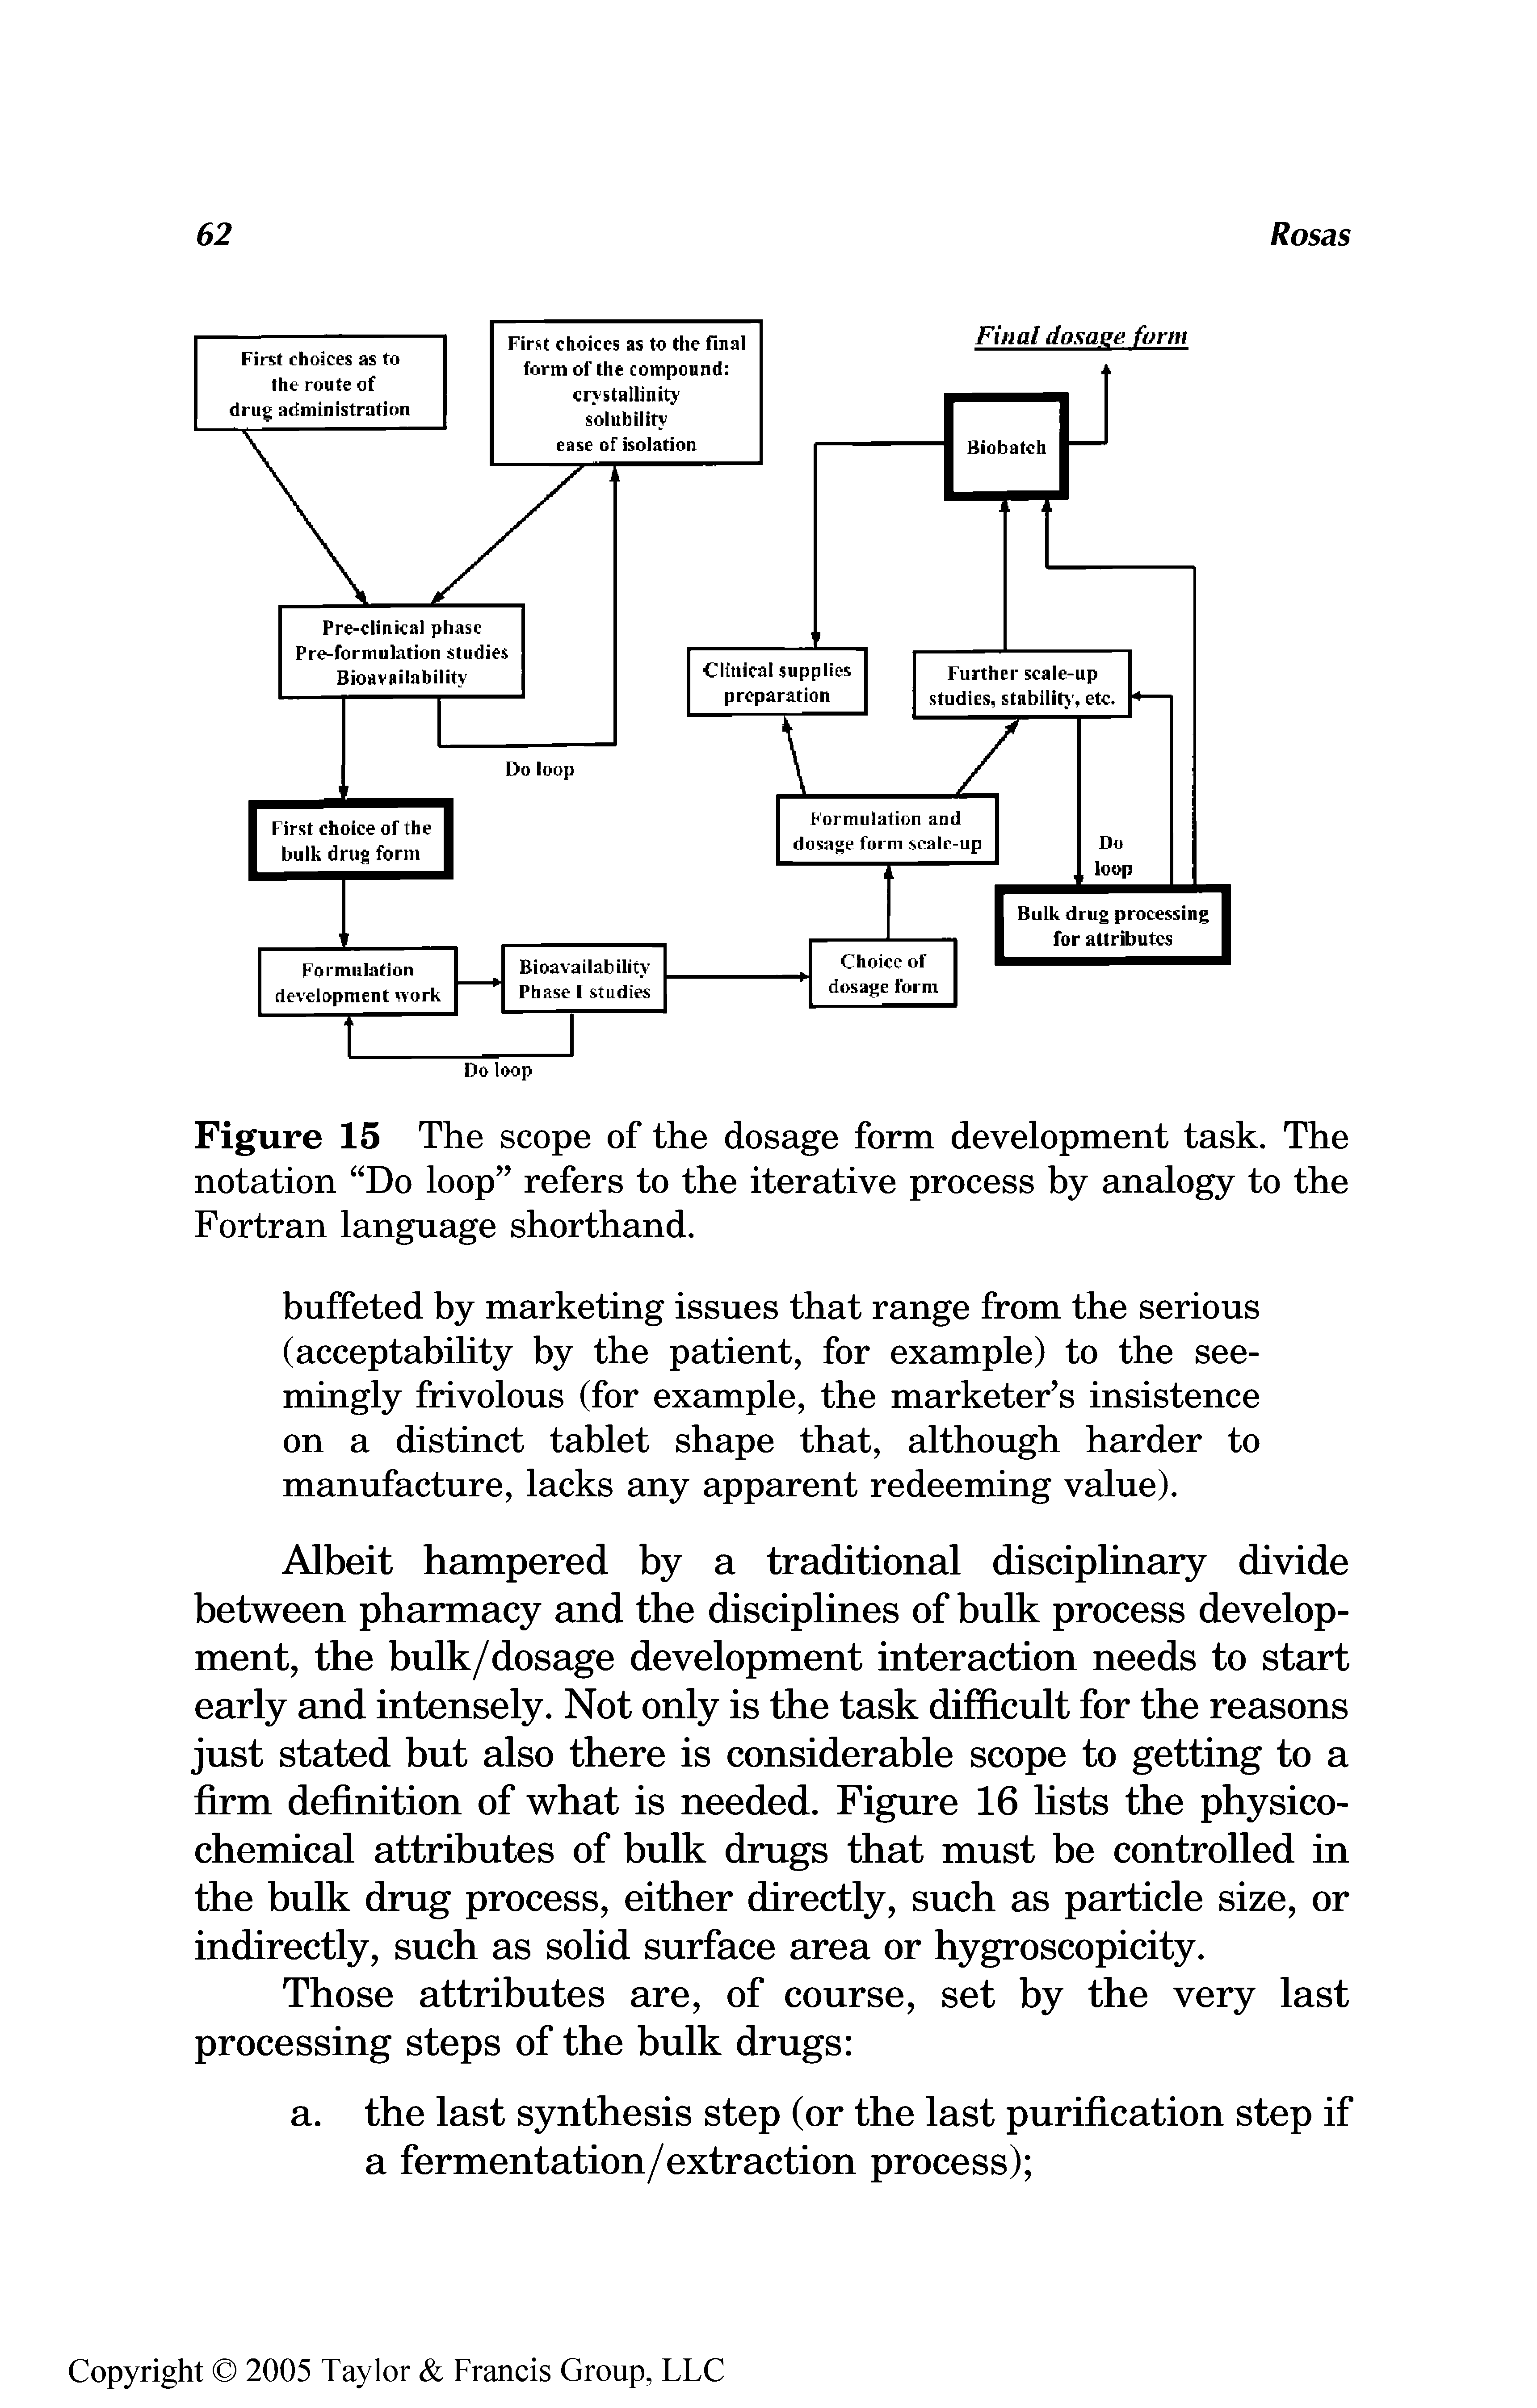 Figure 15 The scope of the dosage form development task. The notation Do loop refers to the iterative process by analogy to the Fortran language shorthand.